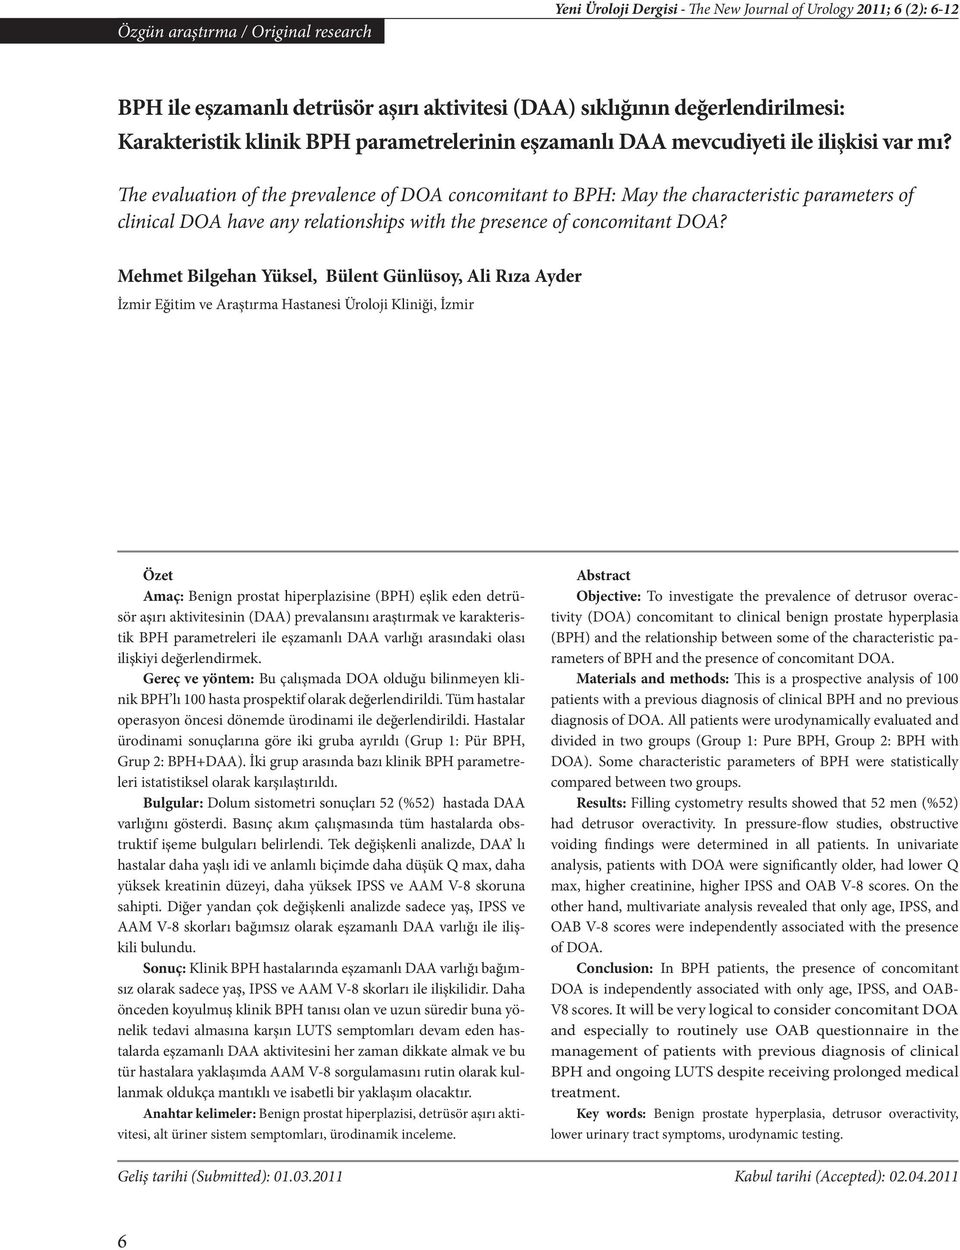 The evaluation of the prevalence of DOA concomitant to BPH: May the characteristic parameters of clinical DOA have any relationships with the presence of concomitant DOA?